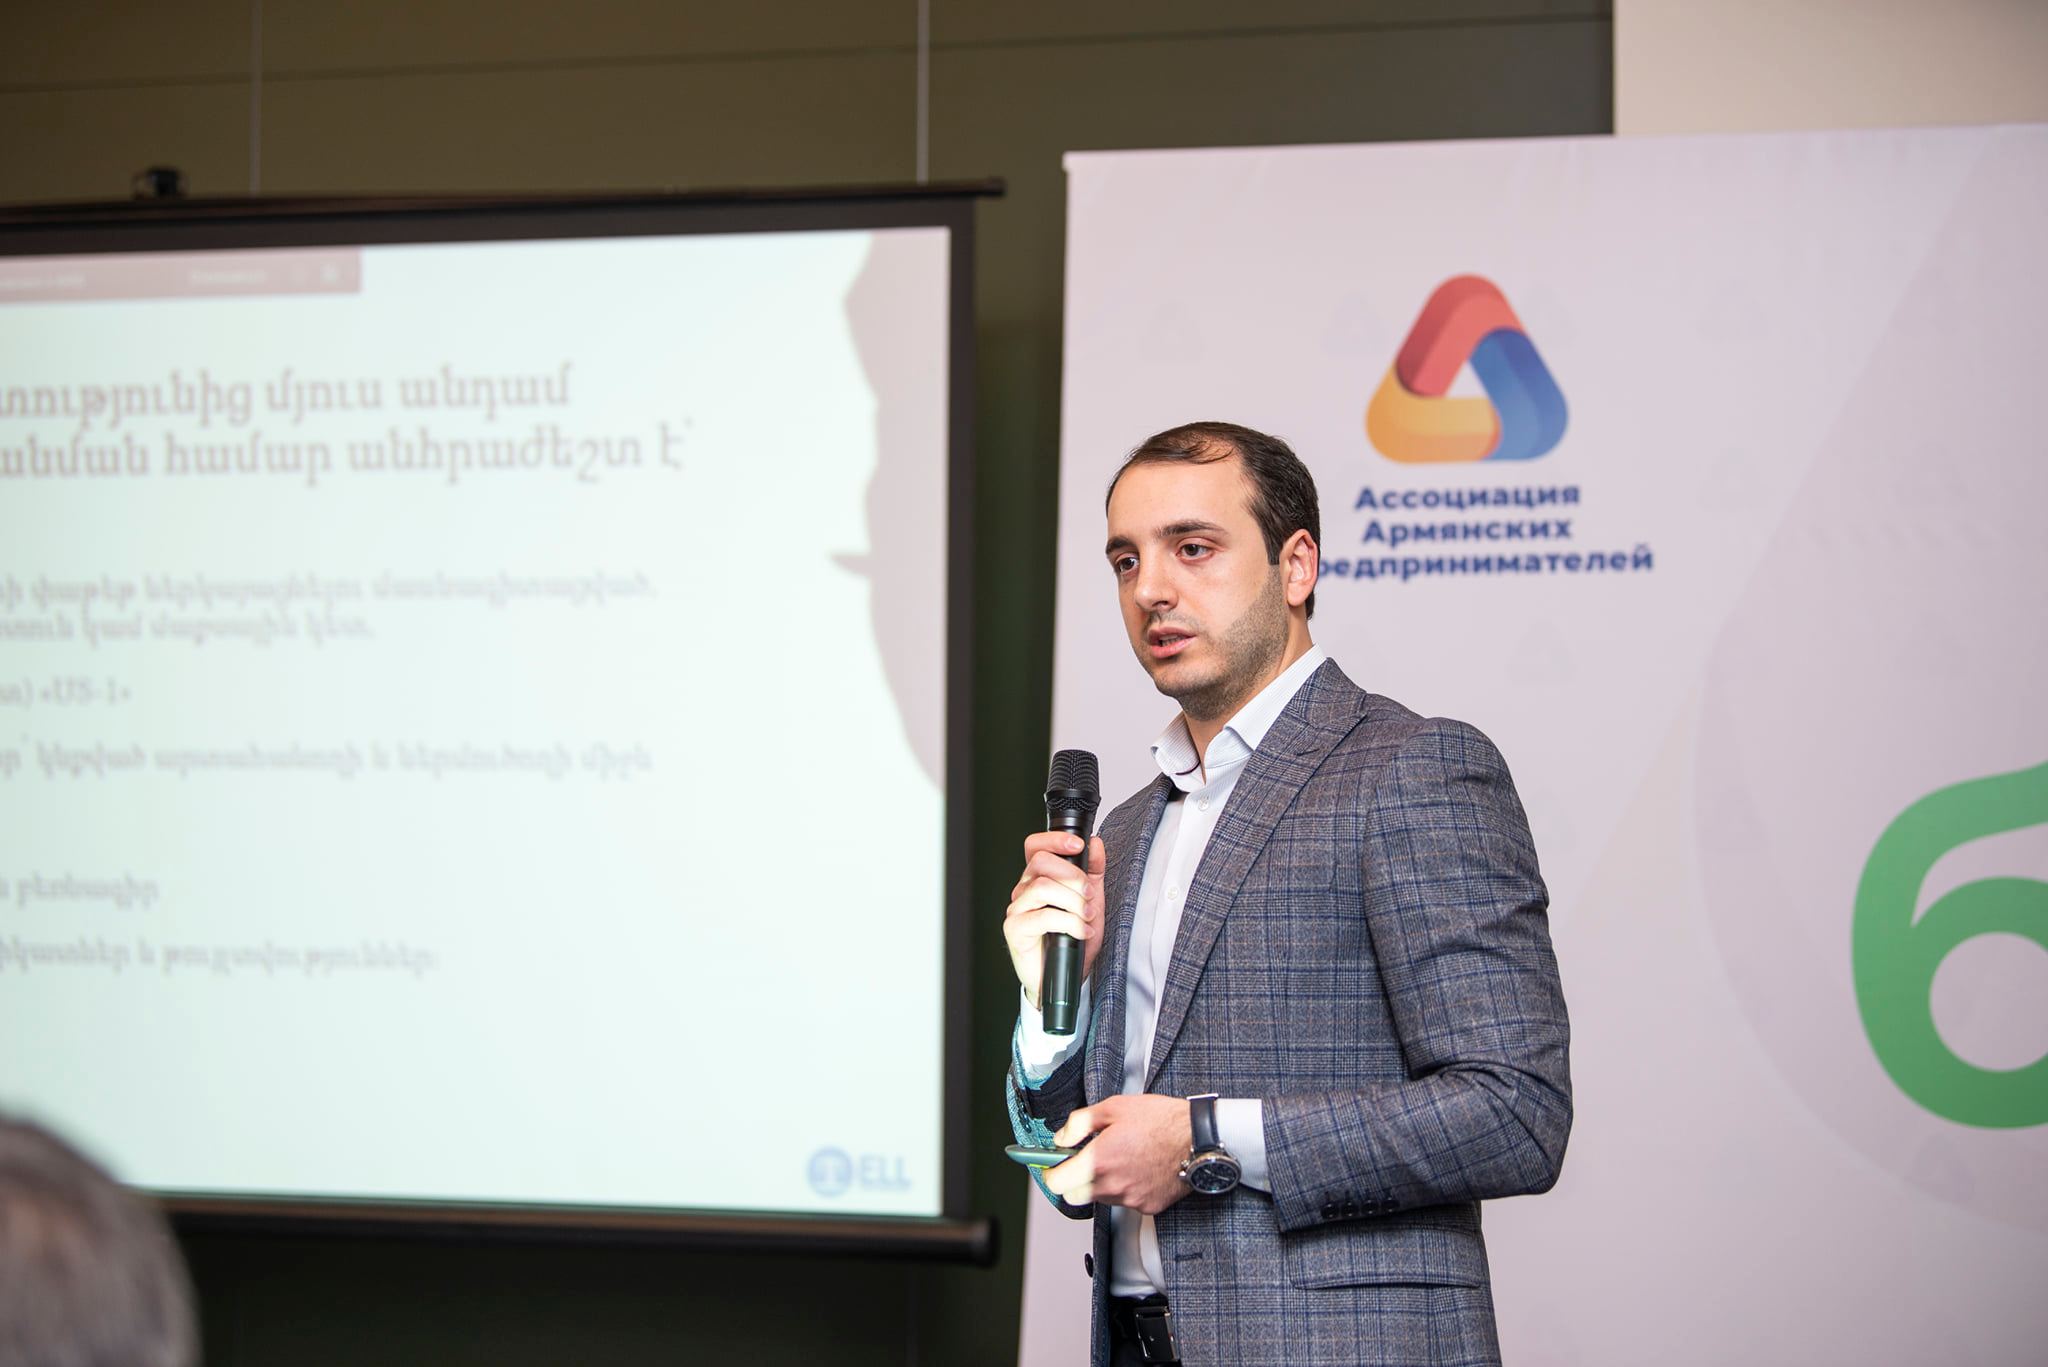 Our Law Firm presented the export process to the EEU member state at the presentation of "Bukhta Yug" shopping center